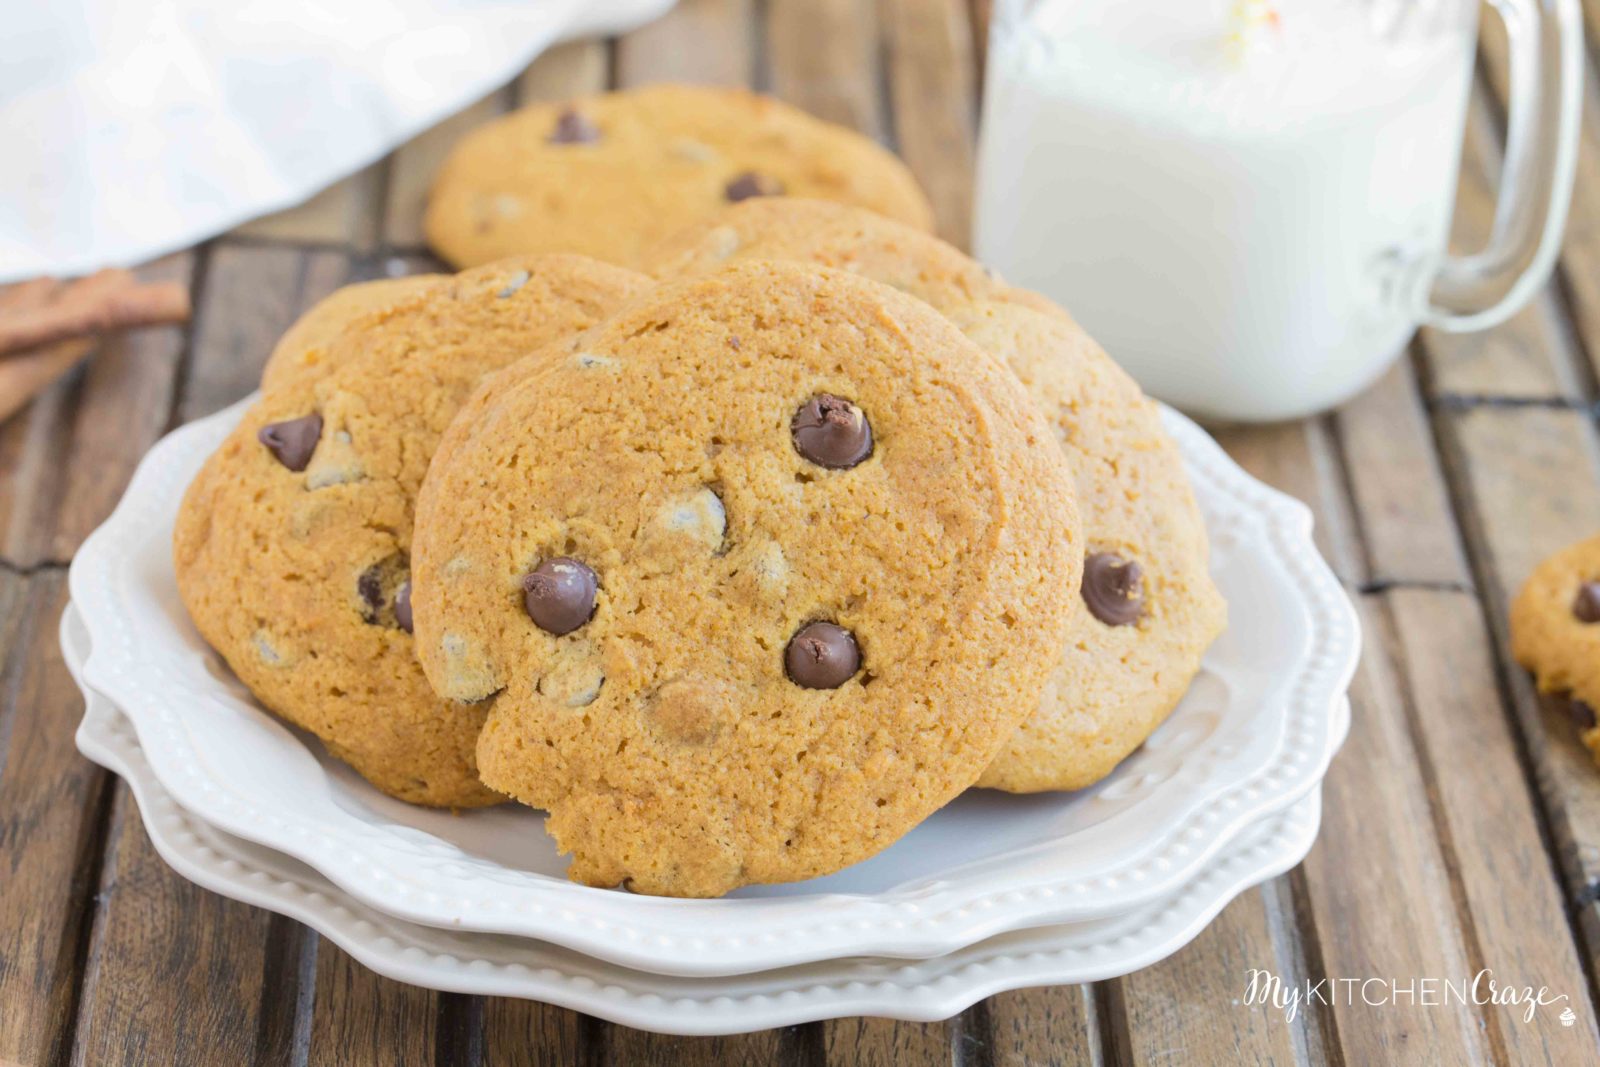 Pumpkin Chocolate Chip Cookies ~ Delicious pumpkin cookies filled with chocolate chips. These cookies are moist and perfect for the season!